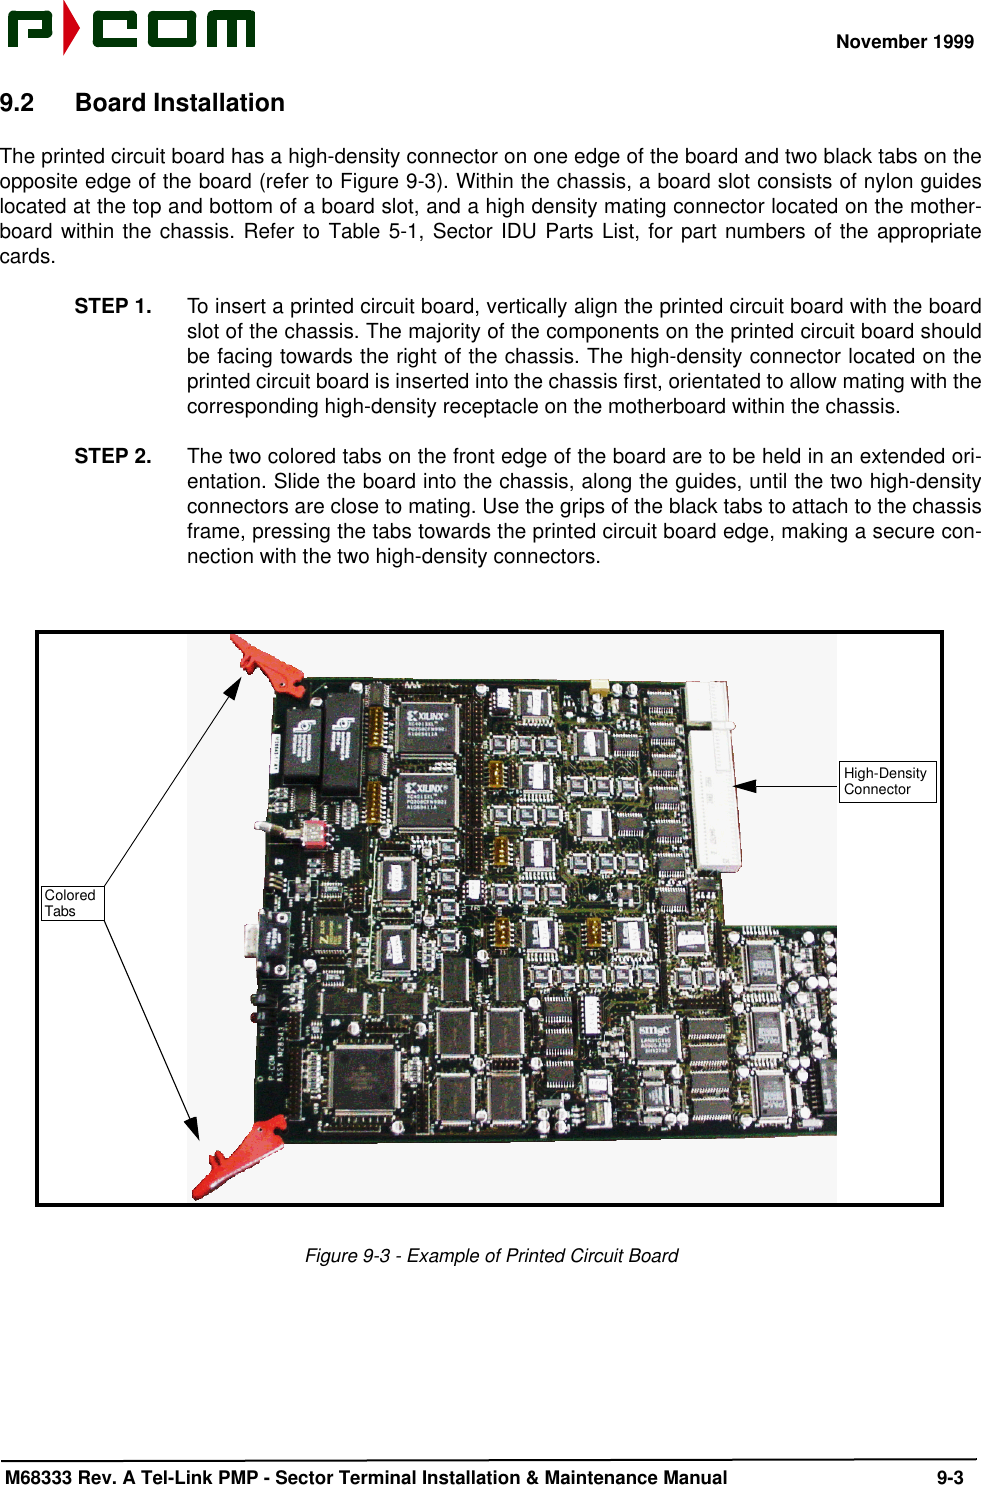 November 1999 M68333 Rev. A Tel-Link PMP - Sector Terminal Installation &amp; Maintenance Manual 9-39.2 Board InstallationThe printed circuit board has a high-density connector on one edge of the board and two black tabs on theopposite edge of the board (refer to Figure 9-3). Within the chassis, a board slot consists of nylon guideslocated at the top and bottom of a board slot, and a high density mating connector located on the mother-board within the chassis. Refer to Table 5-1, Sector IDU Parts List, for part numbers of the appropriatecards.STEP 1. To insert a printed circuit board, vertically align the printed circuit board with the boardslot of the chassis. The majority of the components on the printed circuit board shouldbe facing towards the right of the chassis. The high-density connector located on theprinted circuit board is inserted into the chassis first, orientated to allow mating with thecorresponding high-density receptacle on the motherboard within the chassis.STEP 2. The two colored tabs on the front edge of the board are to be held in an extended ori-entation. Slide the board into the chassis, along the guides, until the two high-densityconnectors are close to mating. Use the grips of the black tabs to attach to the chassisframe, pressing the tabs towards the printed circuit board edge, making a secure con-nection with the two high-density connectors.Figure 9-3 - Example of Printed Circuit BoardHigh-DensityConnectorColoredTabs